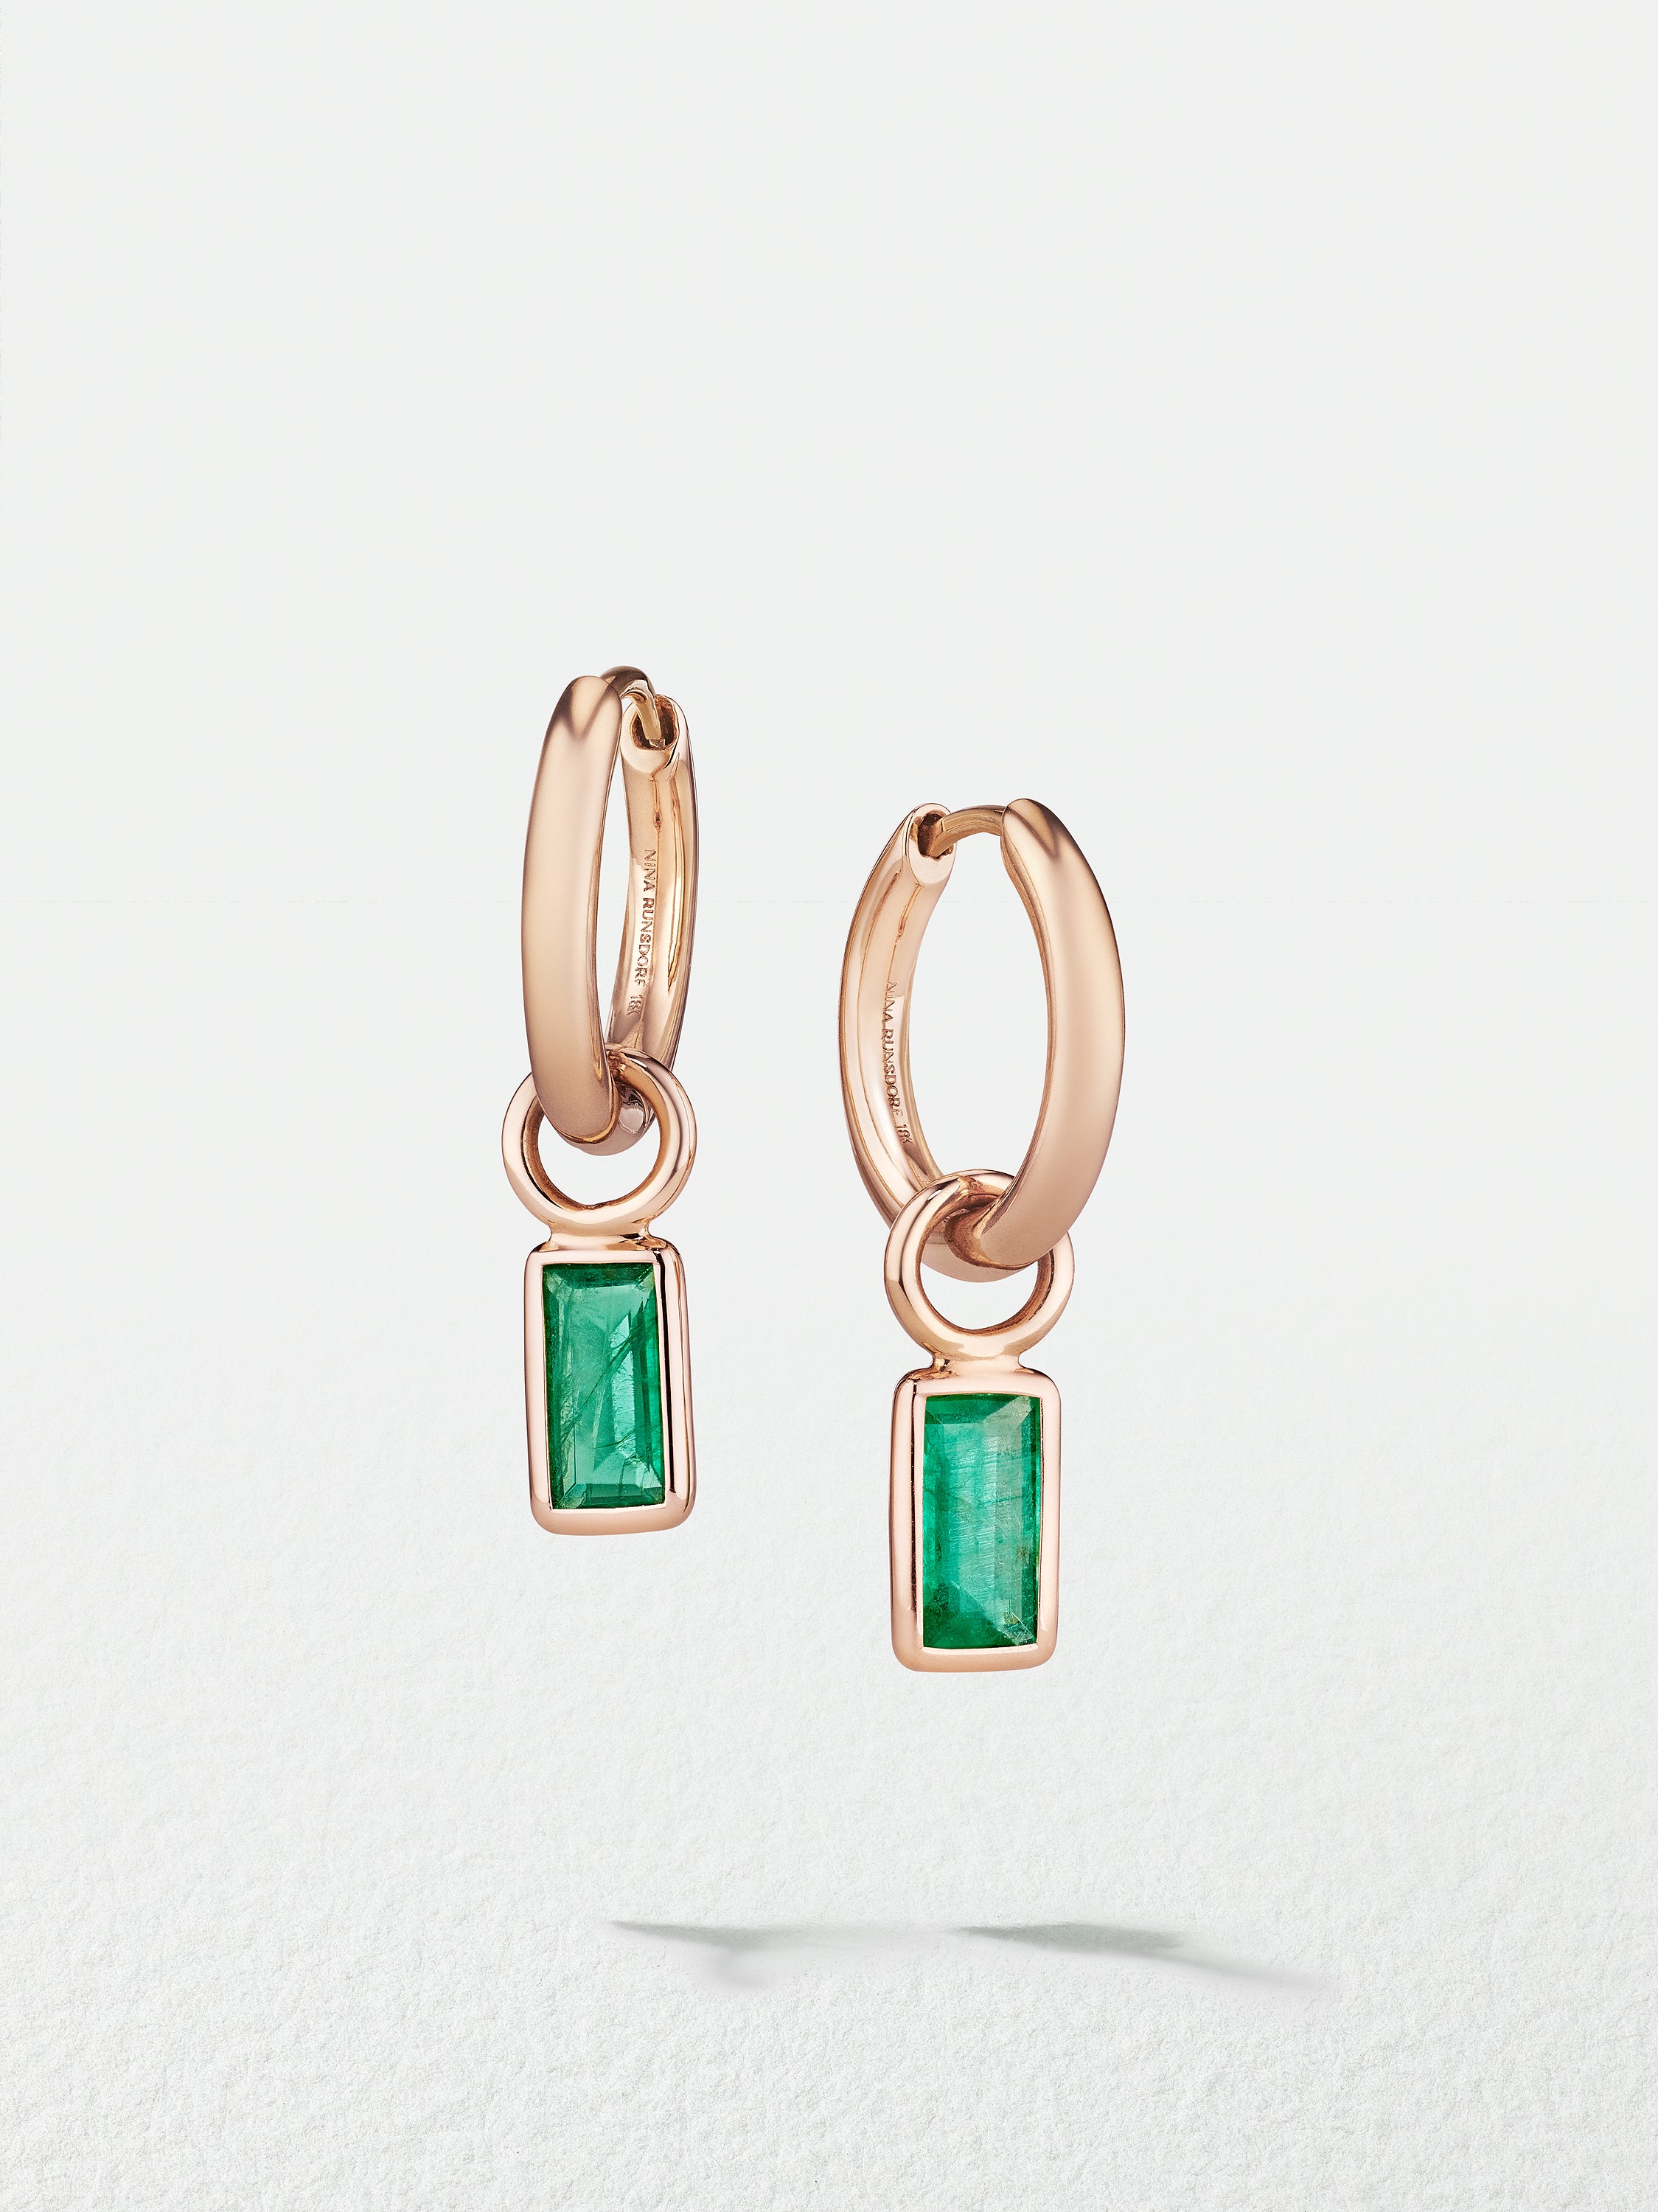 18K Rose Gold Huggies with Emerald Baguette Charms